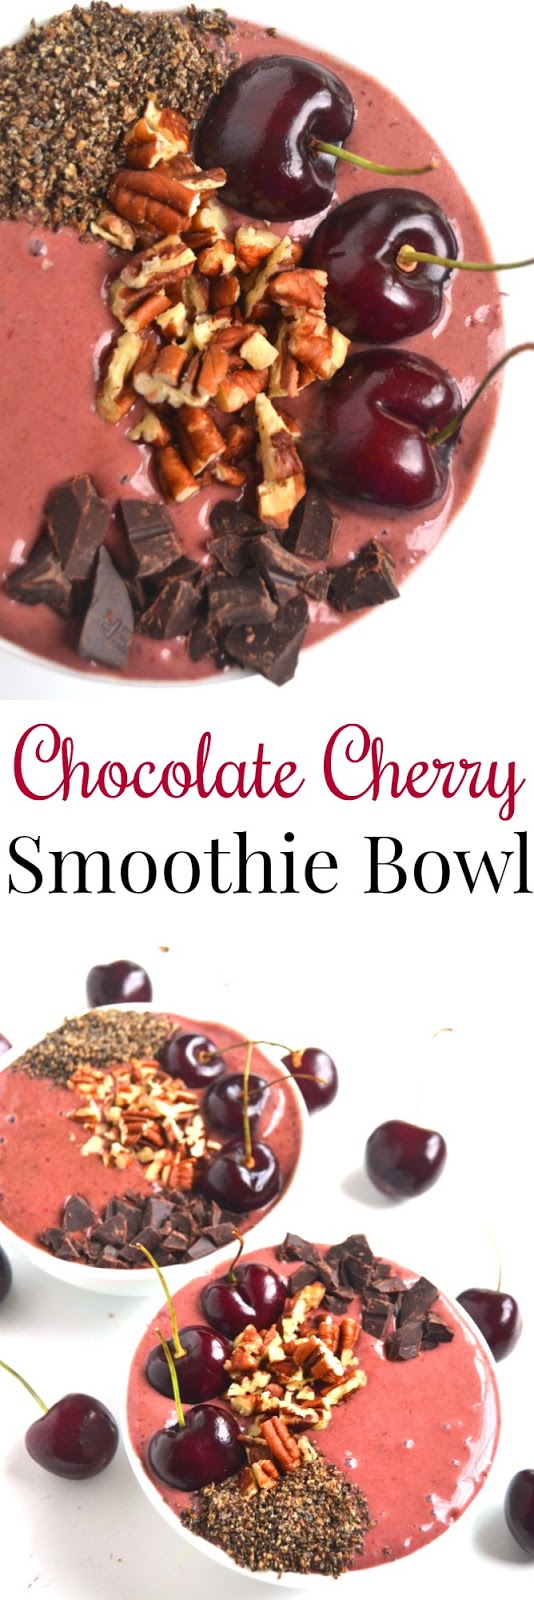 Chocolate Cherry Smoothie Bowls take 5 minutes to make and are the perfect breakfast, snack or dessert. Loaded with cherries, cocoa, banana and cherry yogurt and topped with fun toppings! www.nutritionistreviews.com